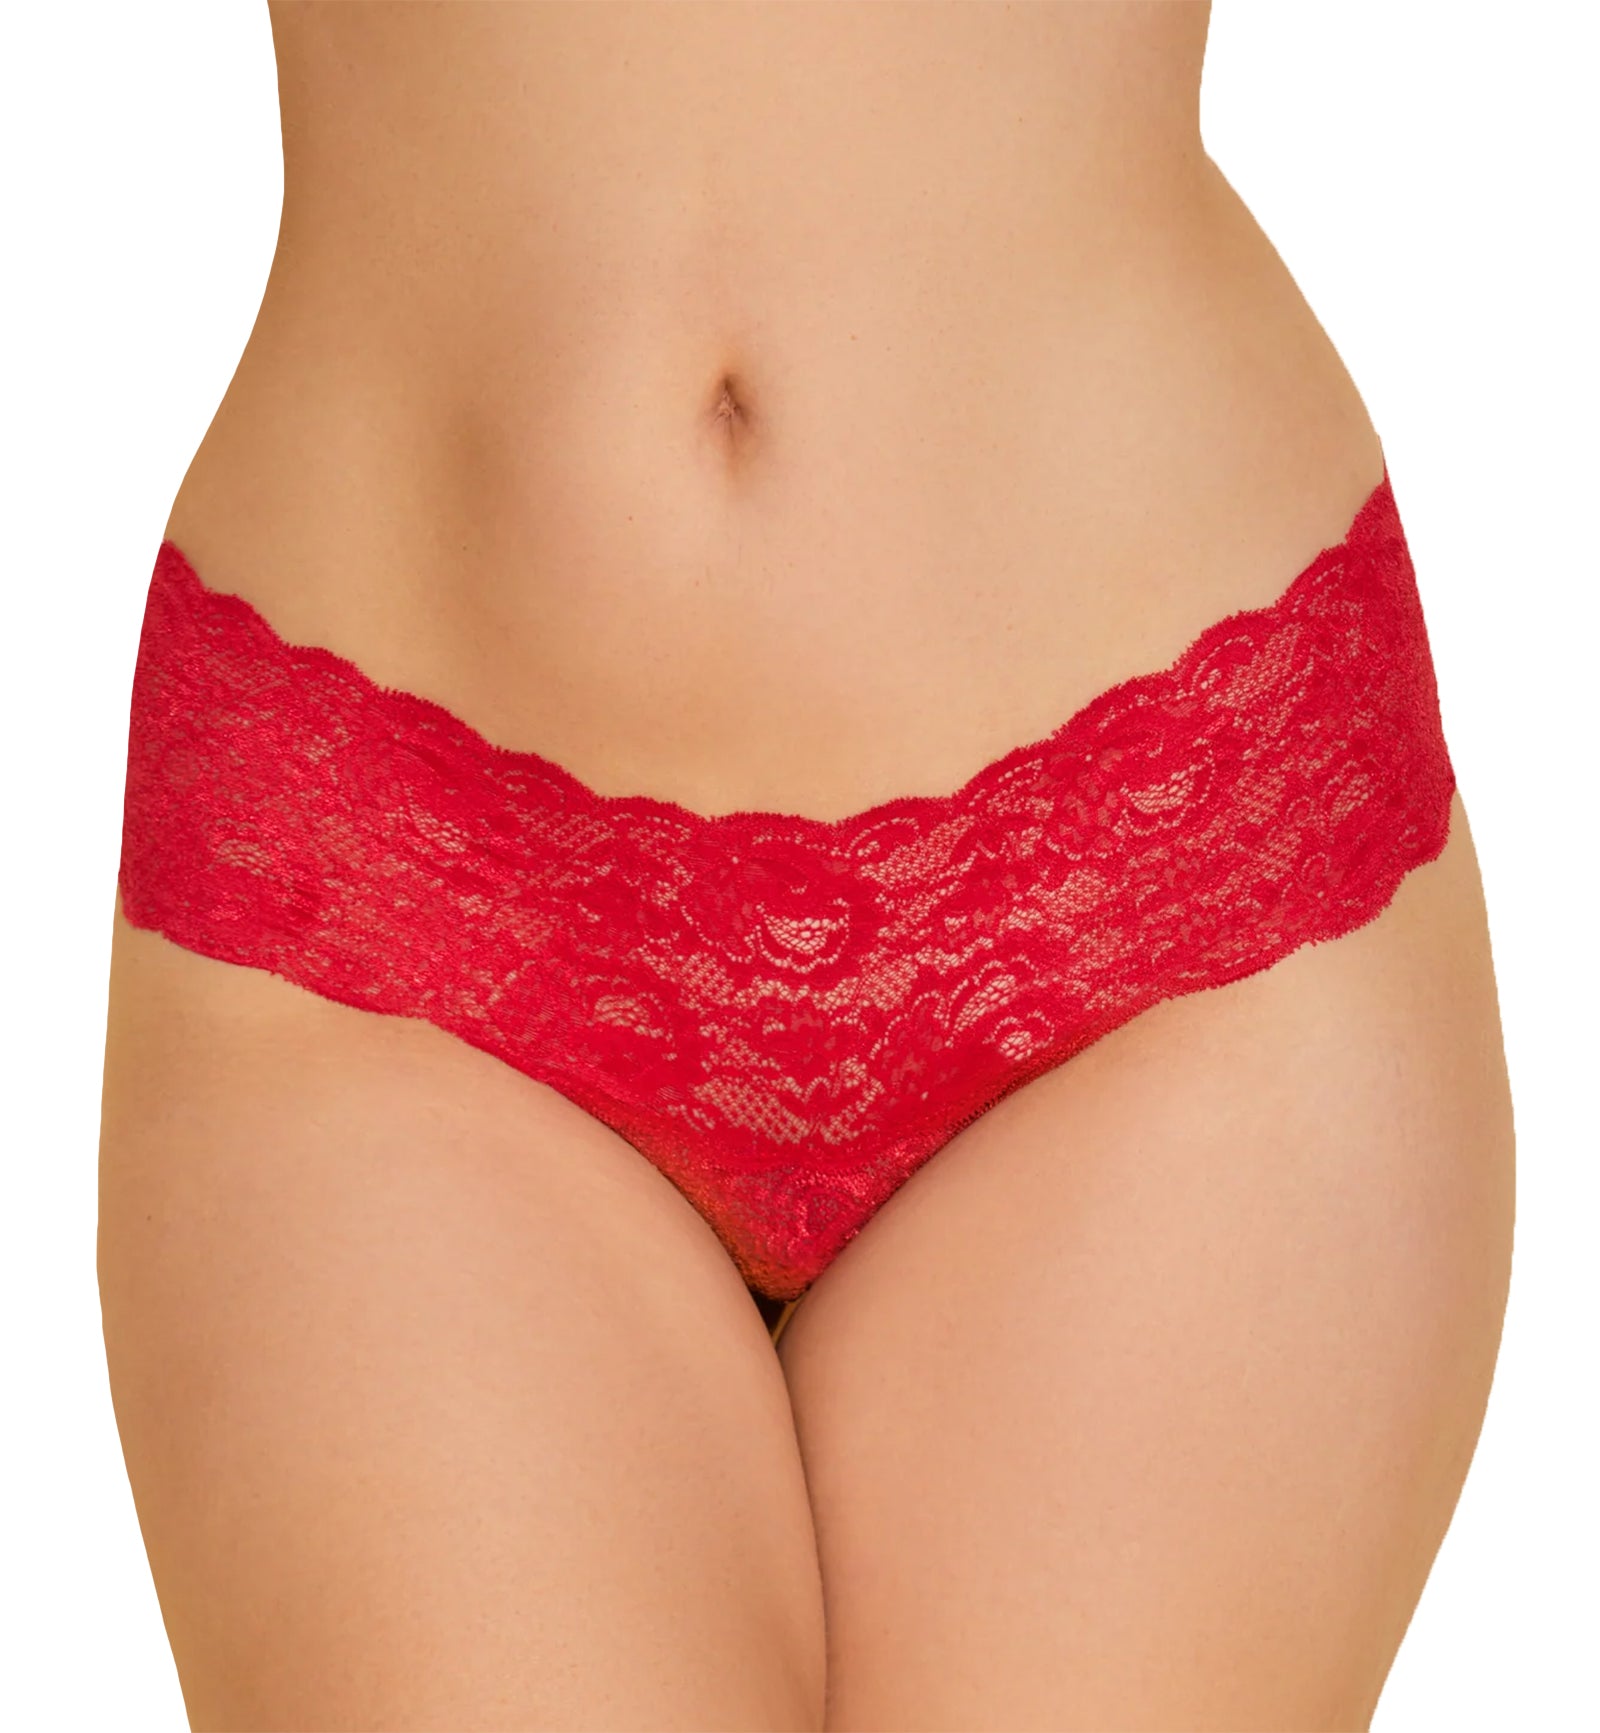 Cosabella Never Say Never Comfie Thong (NEVER0343),S/M,Mystic Red - Mystic Red,S/M